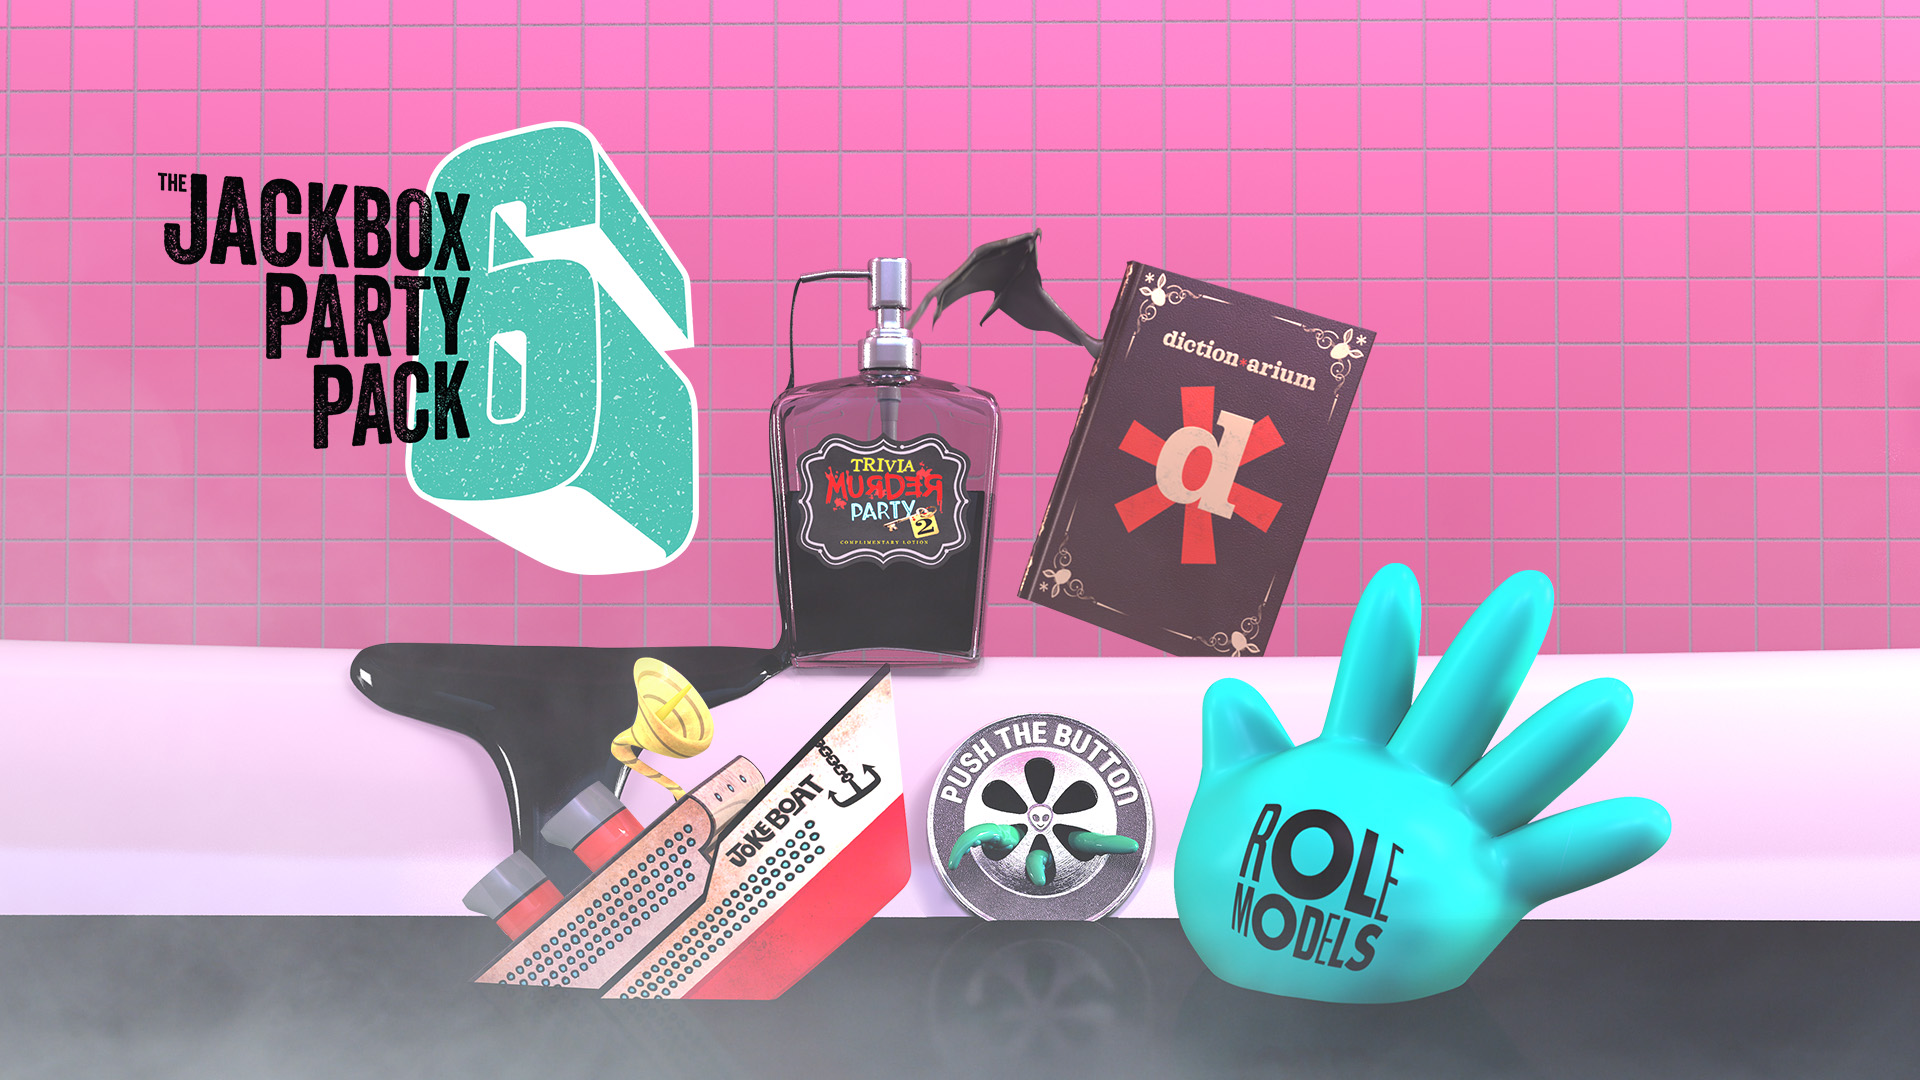 the jackbox party pack 3 platforms